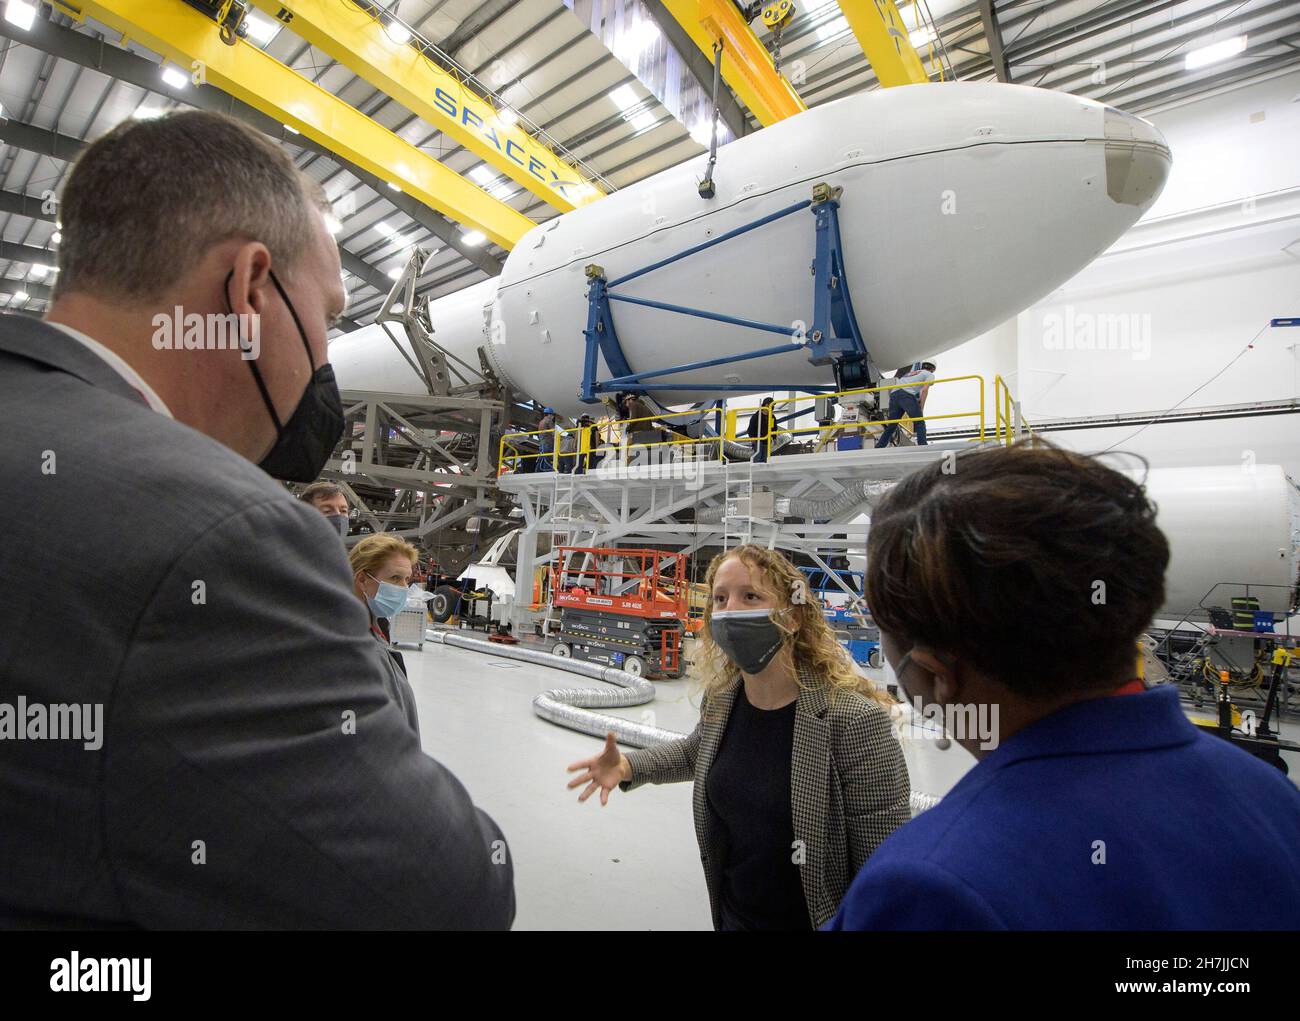 California.US, Nov. 23, 2021, NASA Associate Administrator for the Science Mission Directorate Thomas Zurbuchen, left, and other NASA leadership listen as Julianna Scheiman, director for civil satellite missions at SpaceX, center, gives a tour of the hanger where the Falcon 9 rocket and DART spacecraft are being readied for launch, Monday, Nov. 22, 2021, at Vandenberg Space Force Base in California. DART is the worlds first full-scale planetary defense test, demonstrating one method of asteroid deflection technology. The mission was built and is managed by Johns Hopkins APL for NASAs Planeta Stock Photo